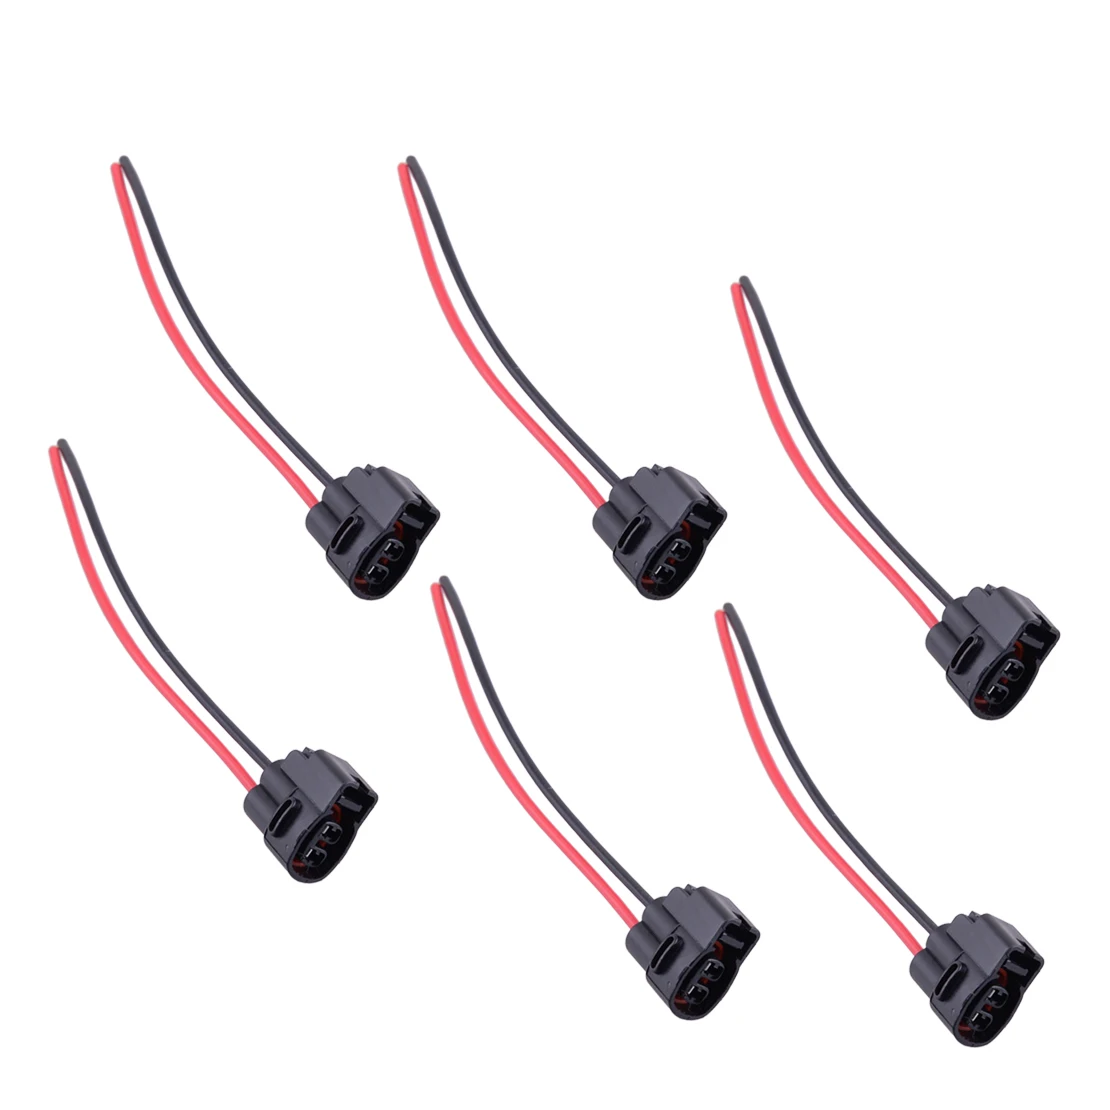 

CITALL 6pcs Ignition Coil Connector Pigtail Plug Harness Fit For Toyota 4Runner Camry Celica MR2 Lexus LS400 SC400 90980-11246